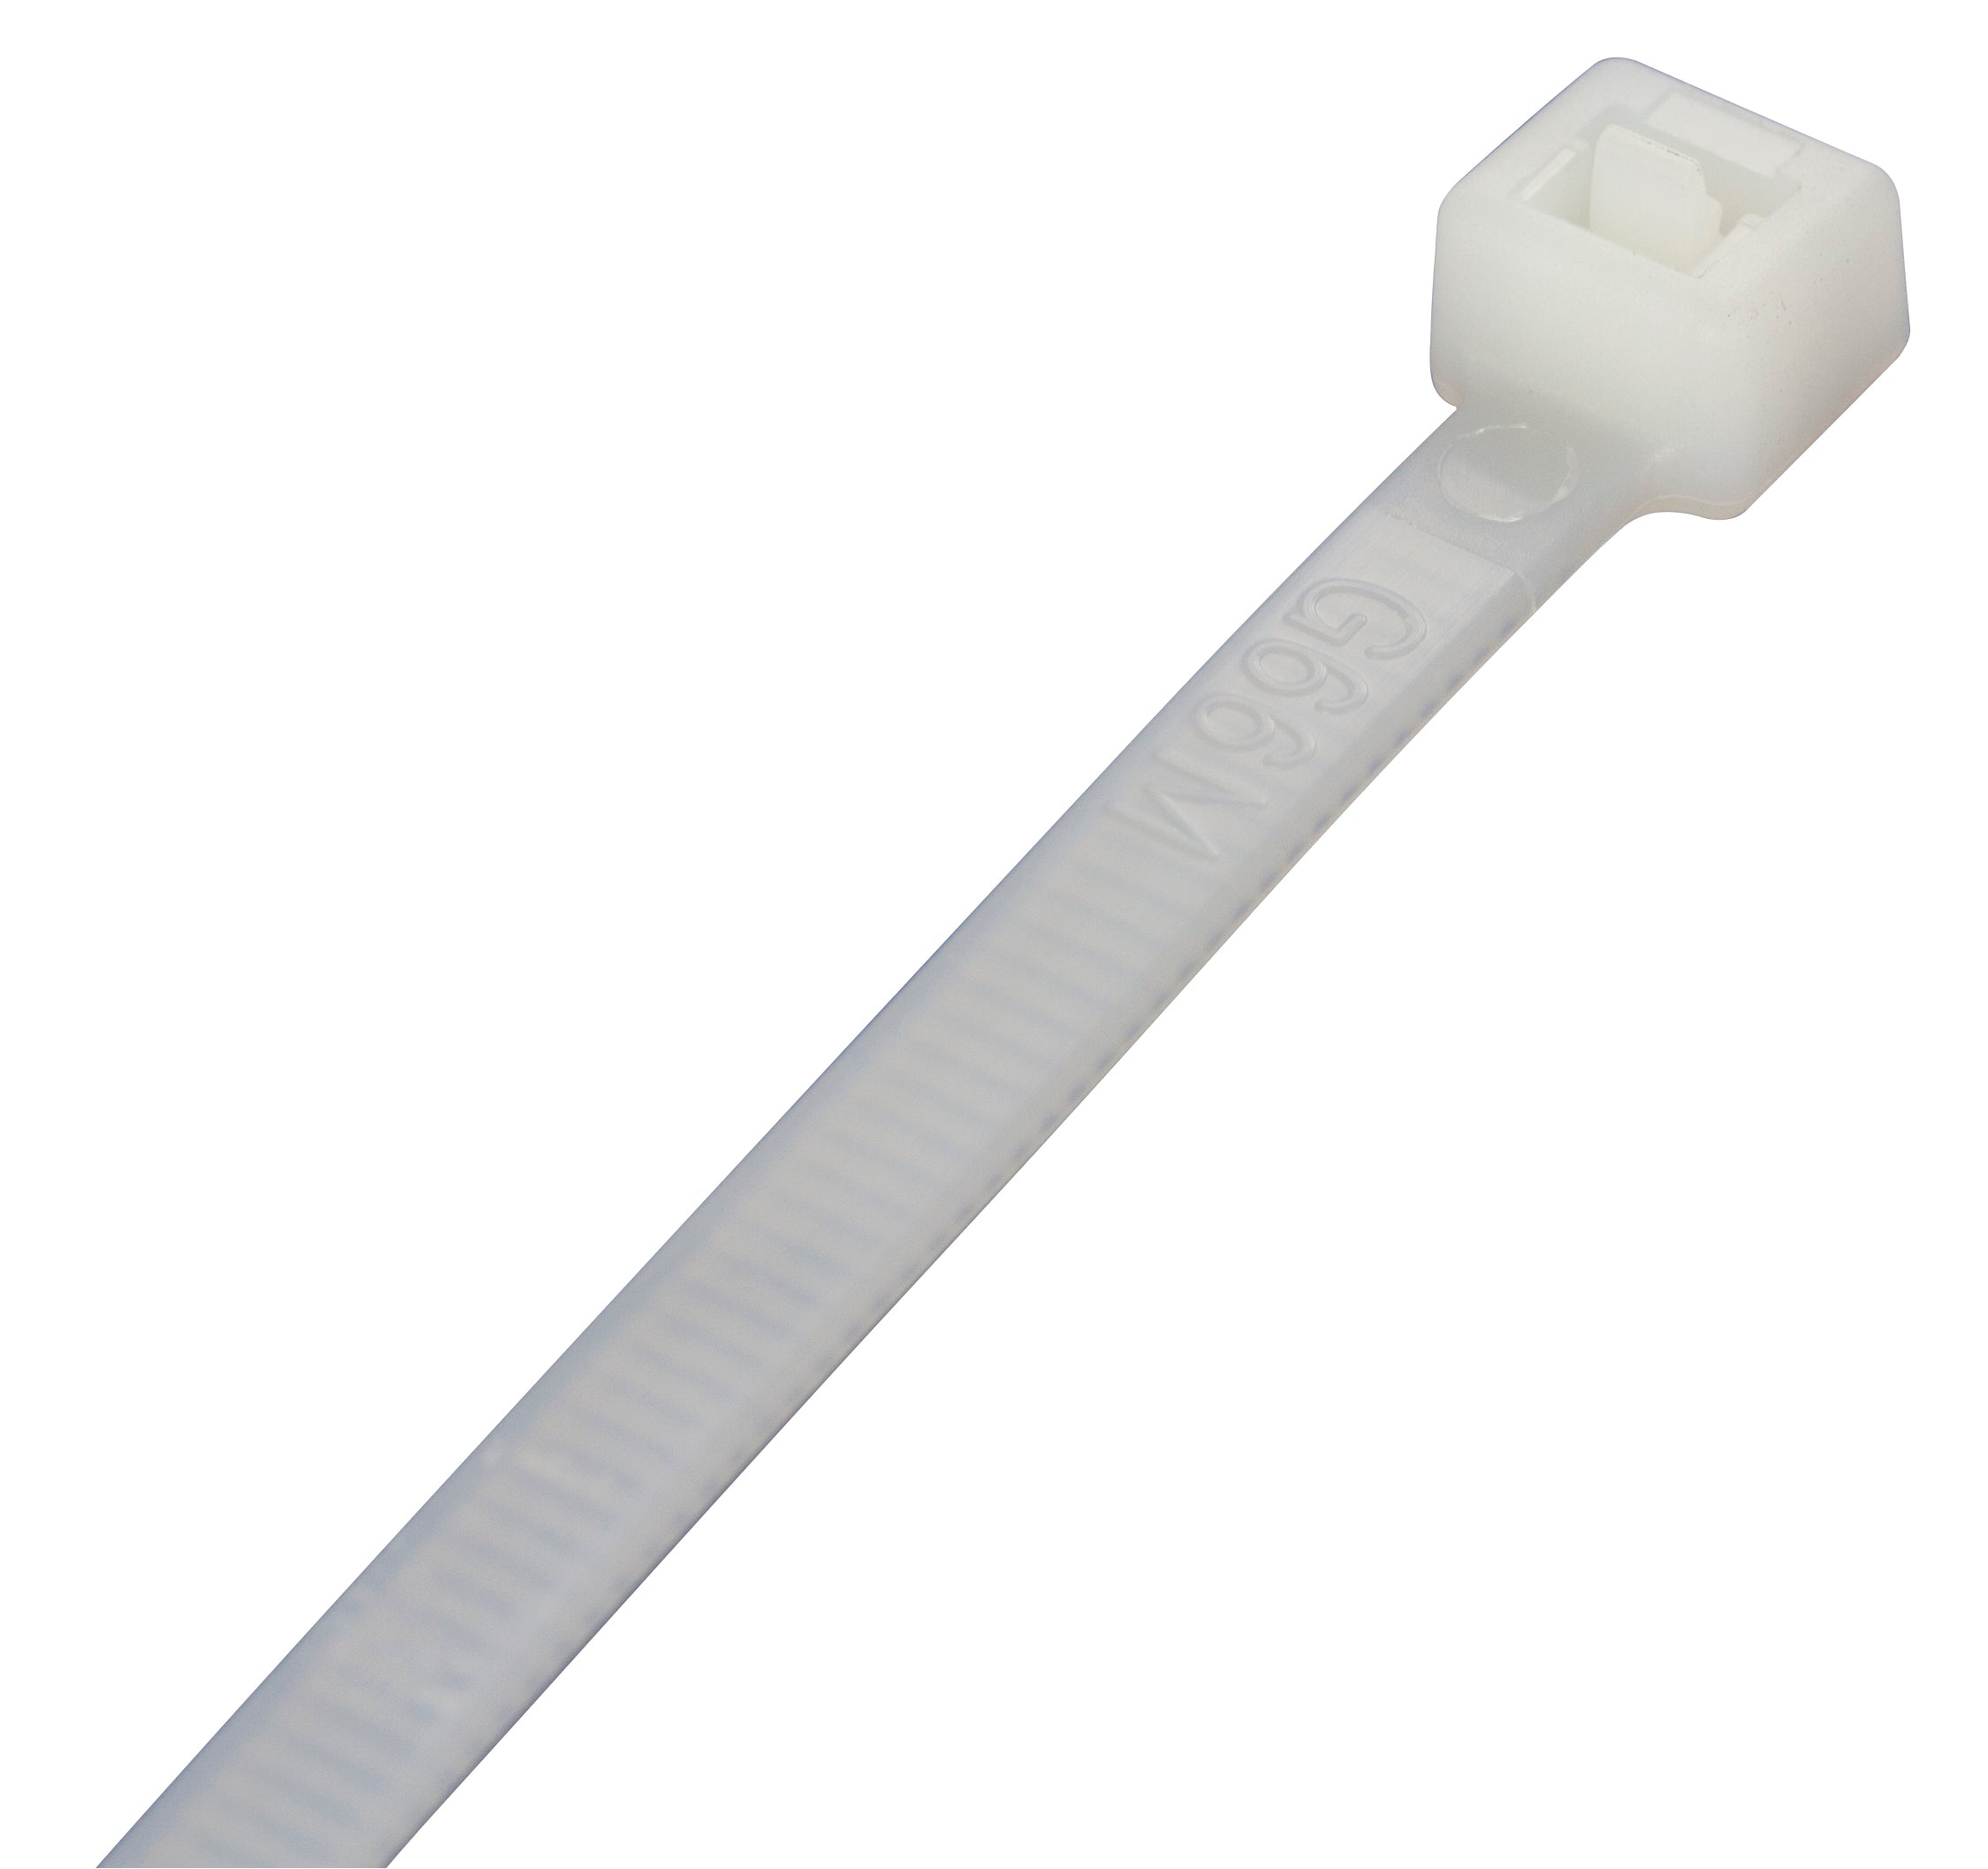 Premium Natural Cable Ties 200mm x 4.8mm - Pack of 100